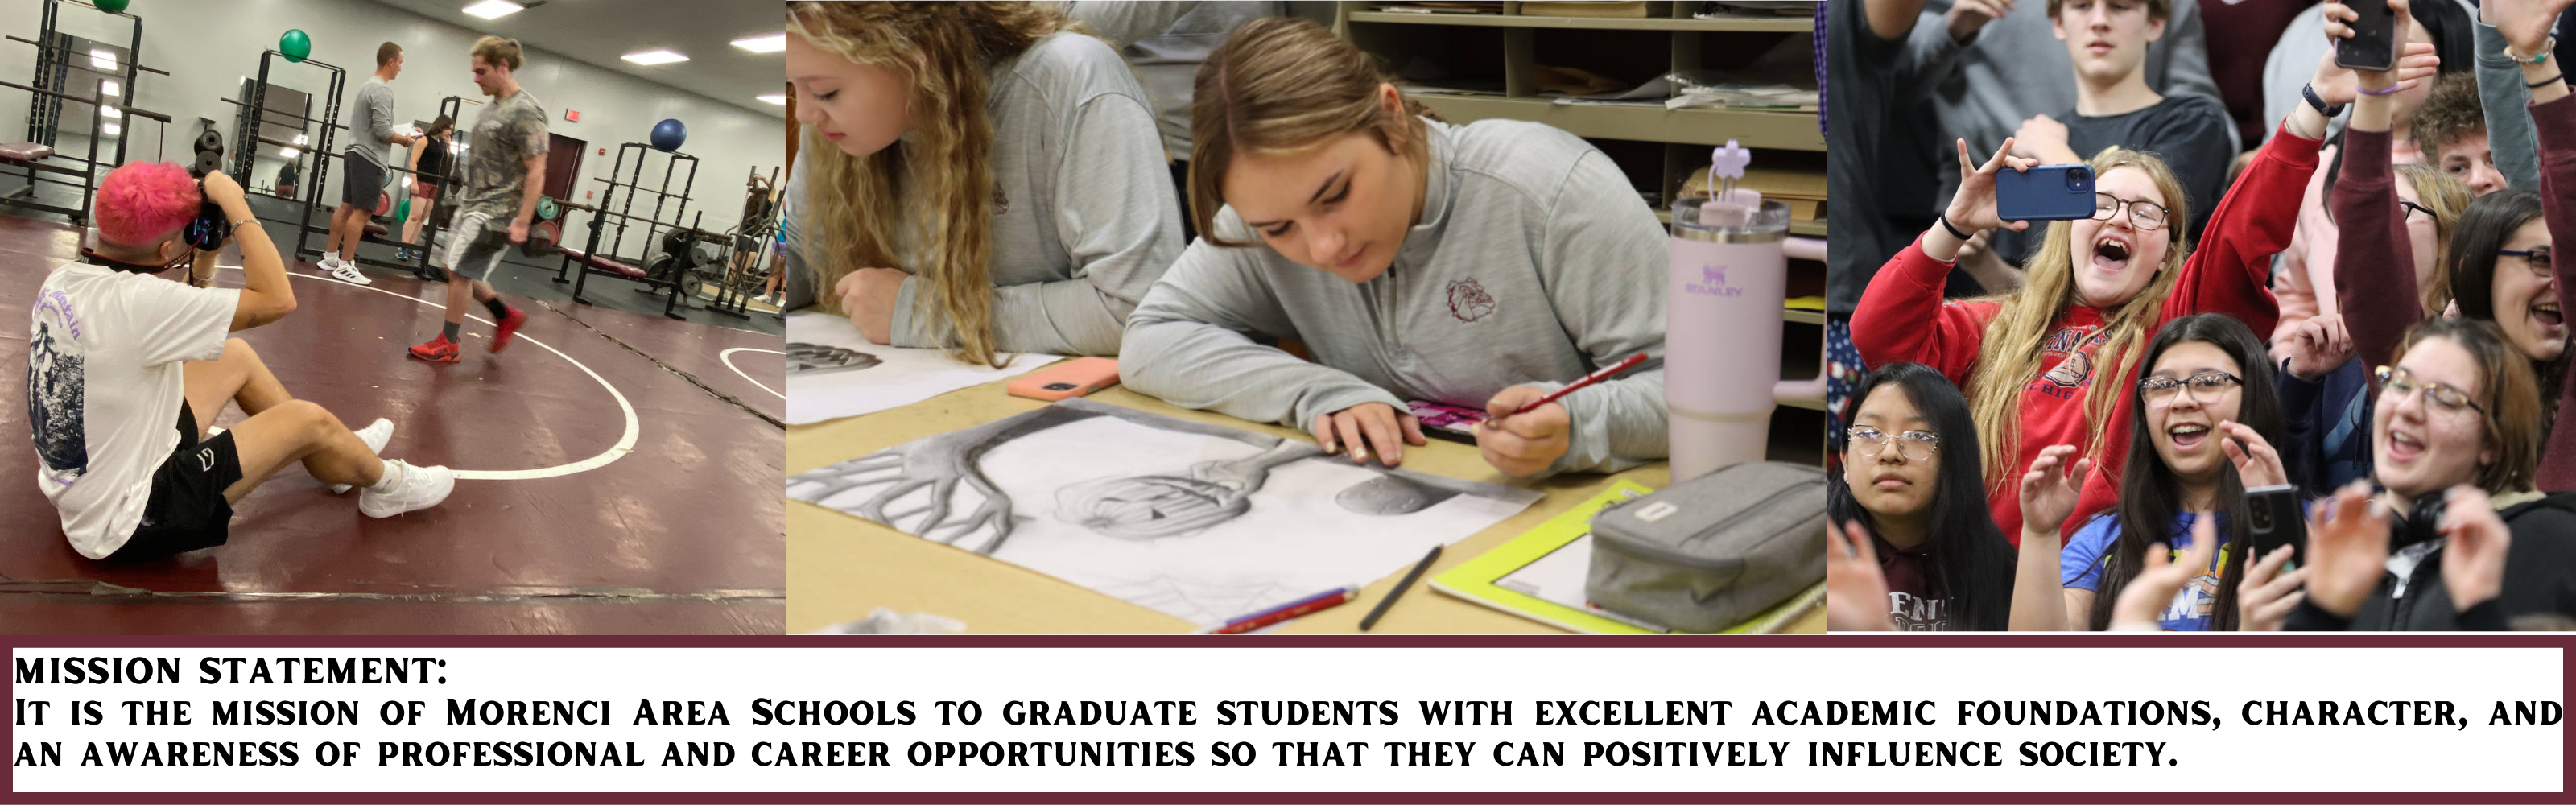 MISSION STATEMENT: It is the mission of Morenci Area Schools to graduate students with excellent academic foundations, character, and an awareness of professional and career opportunities so that they can positively influence society.